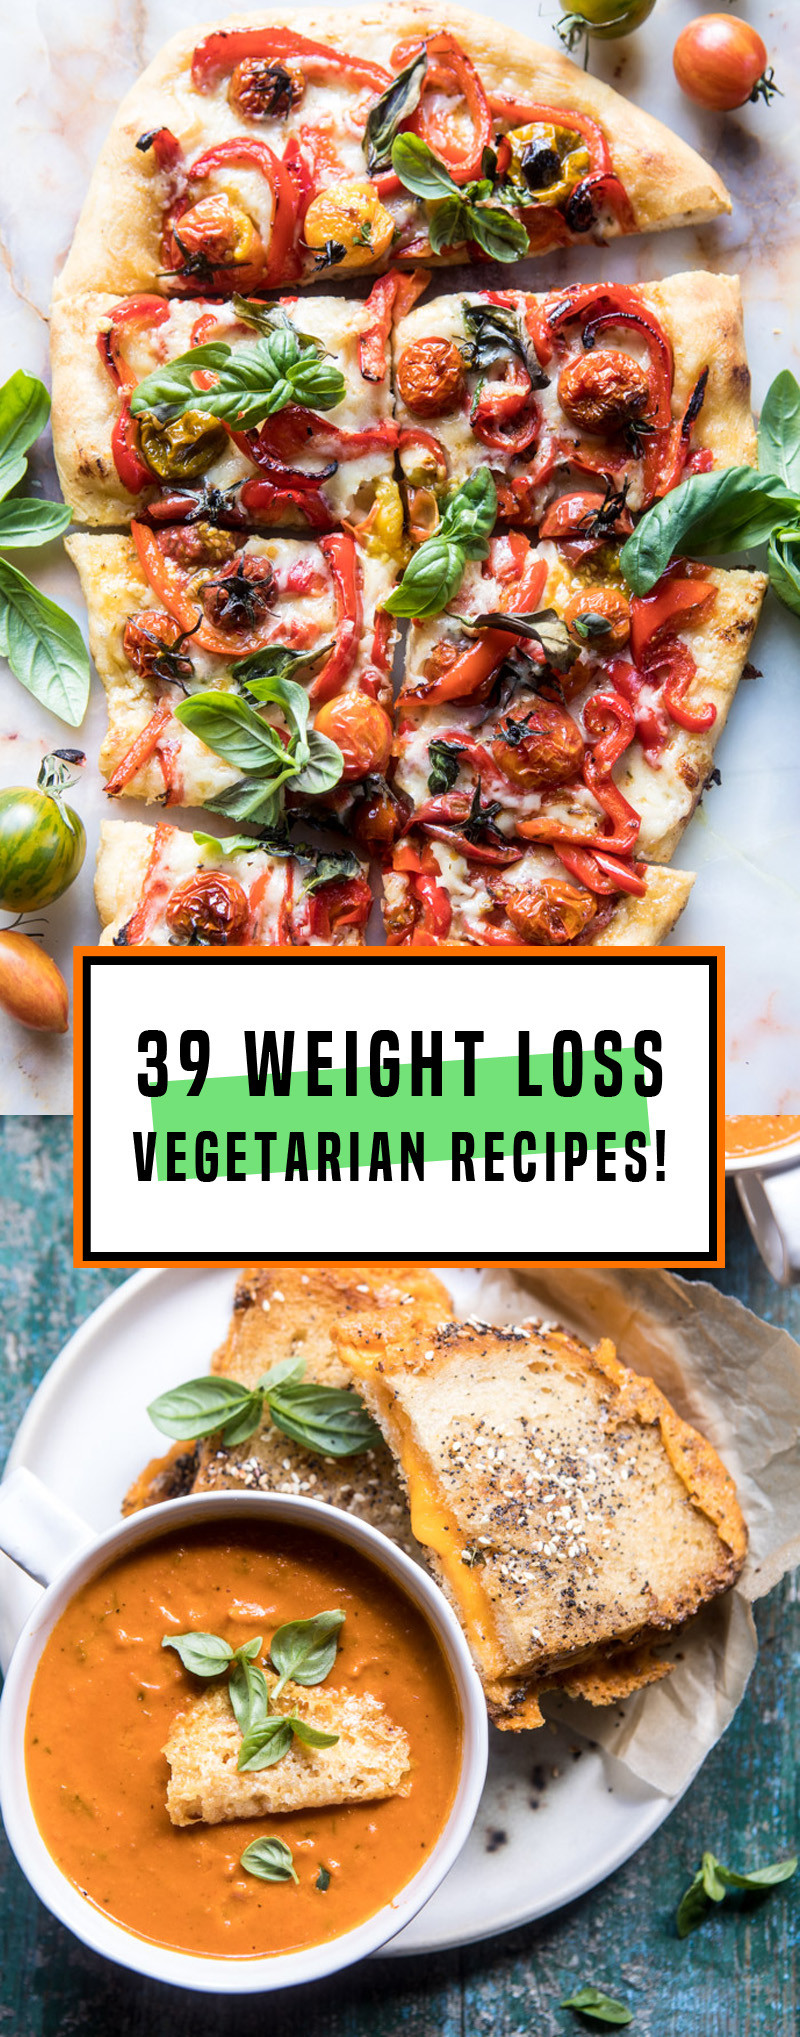 Vegan Weight Watchers Recipes
 39 Ve arian Weight Loss Recipes That Are Healthy And